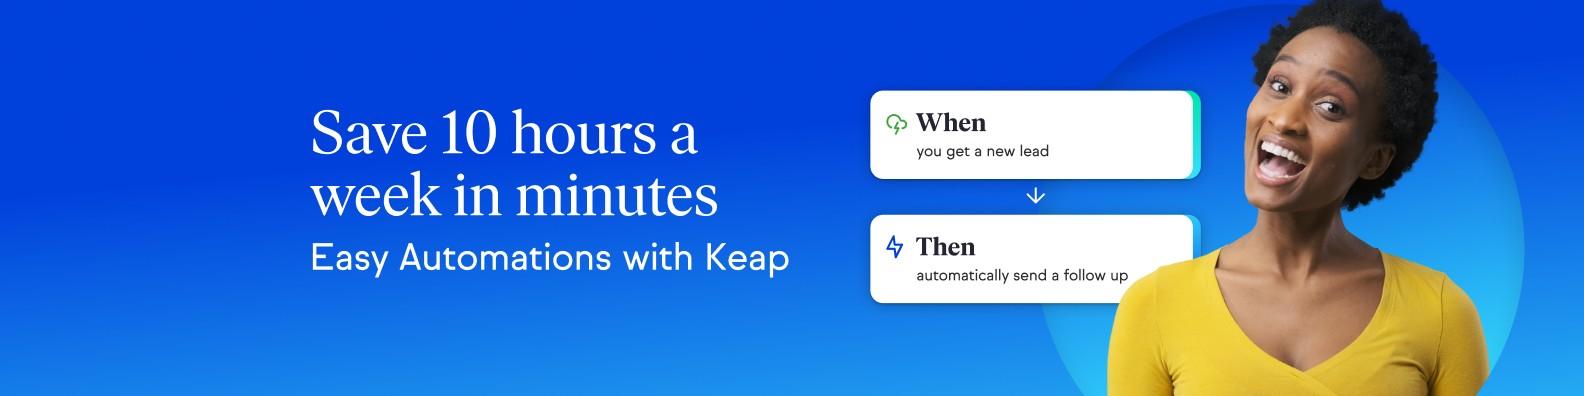 Review Keap: Grow sales and save time with automation - Appvizer